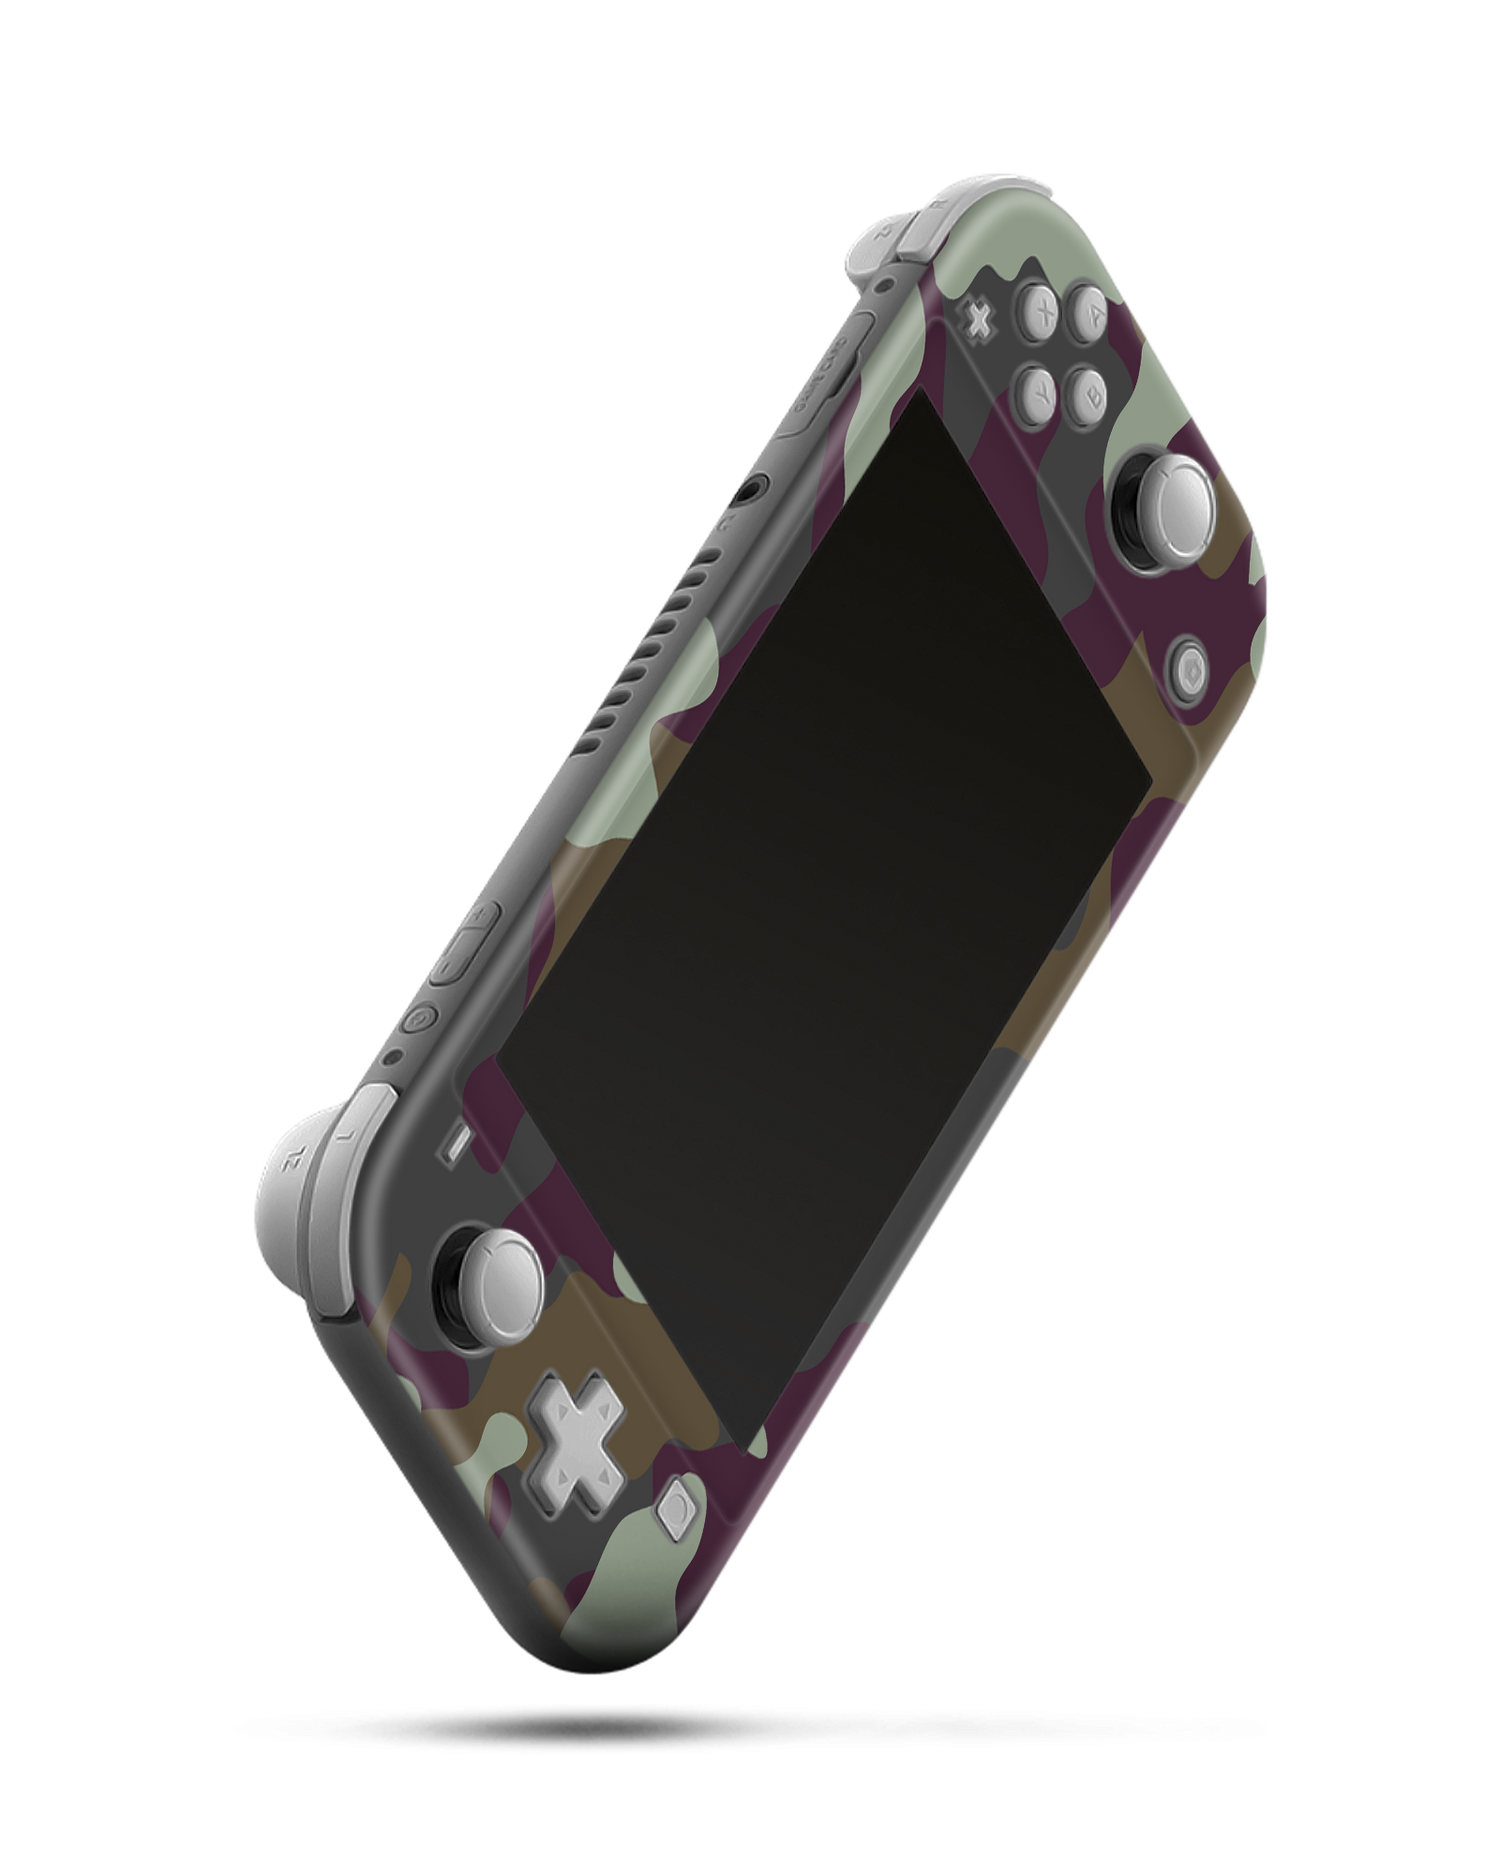 Night Camo Console Skin for Nintendo Switch Lite: Side view